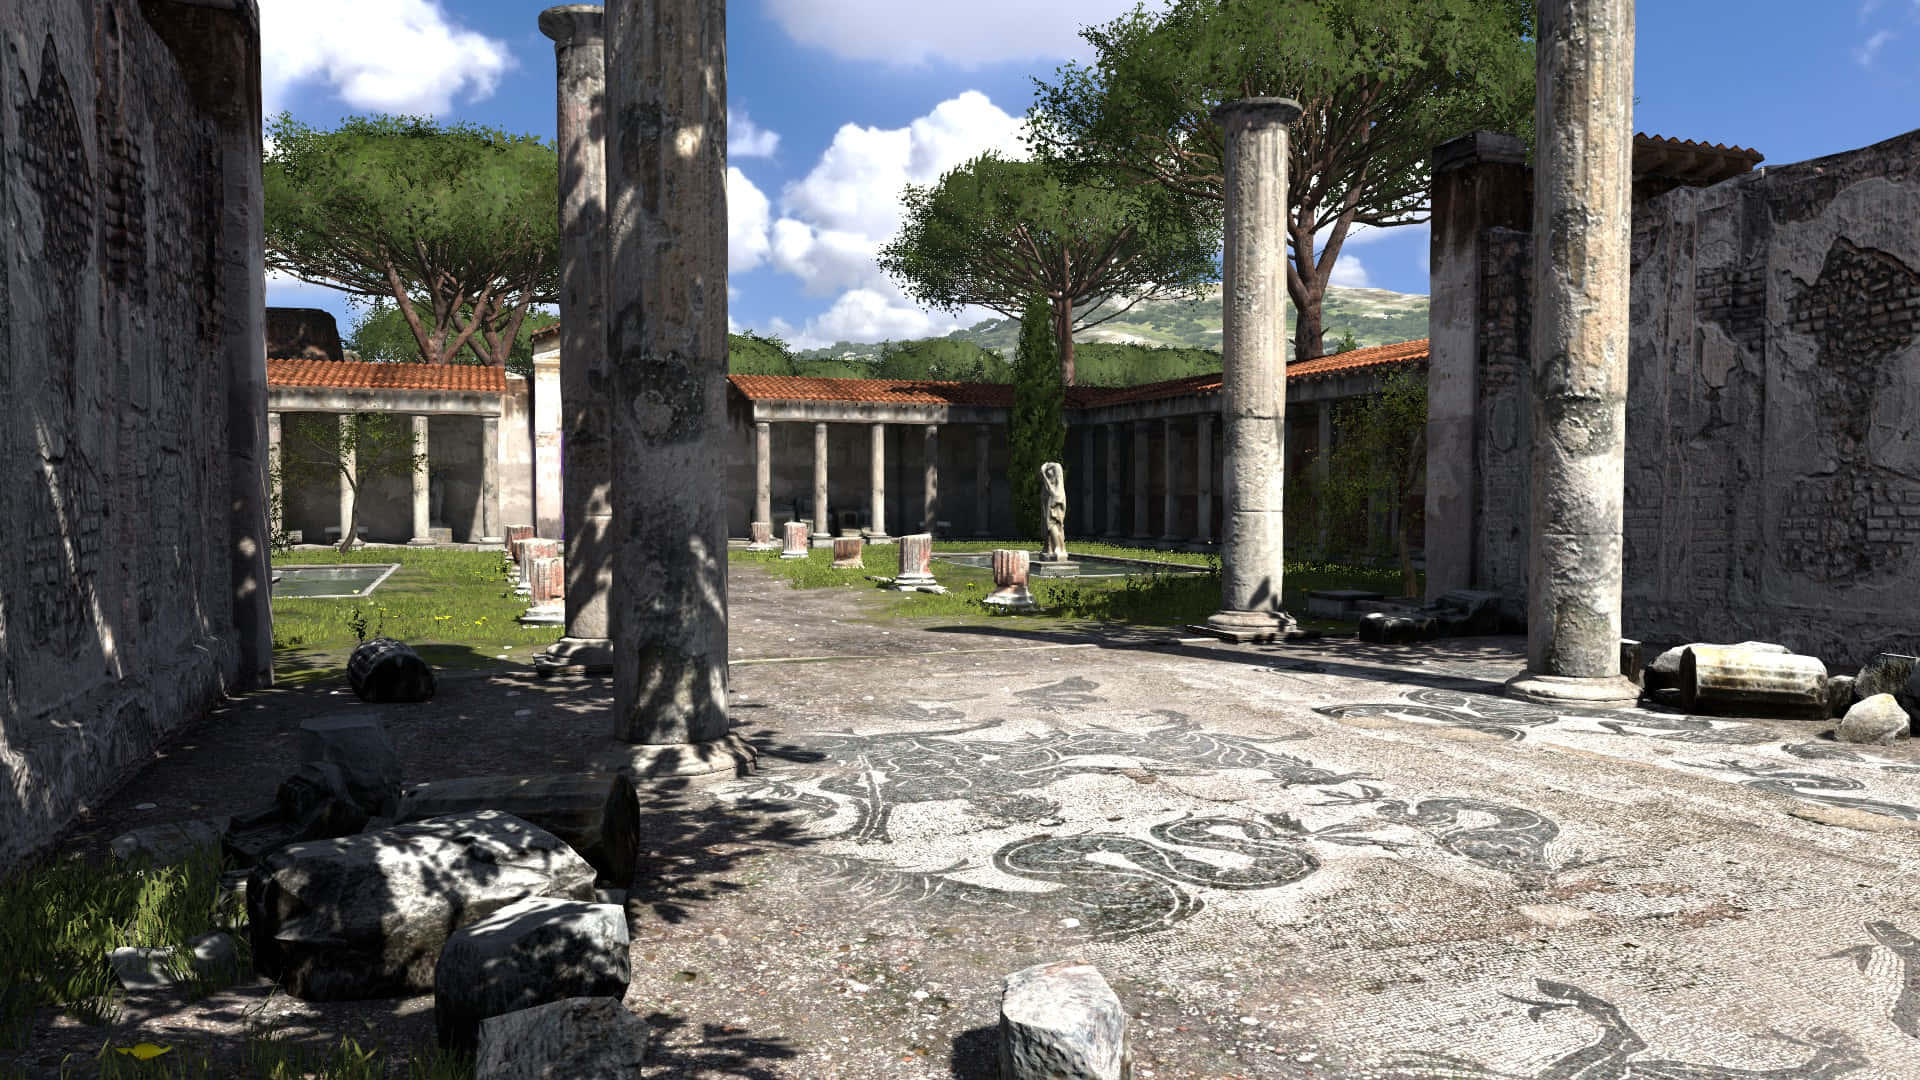 Captivating Scenery from The Talos Principle Game